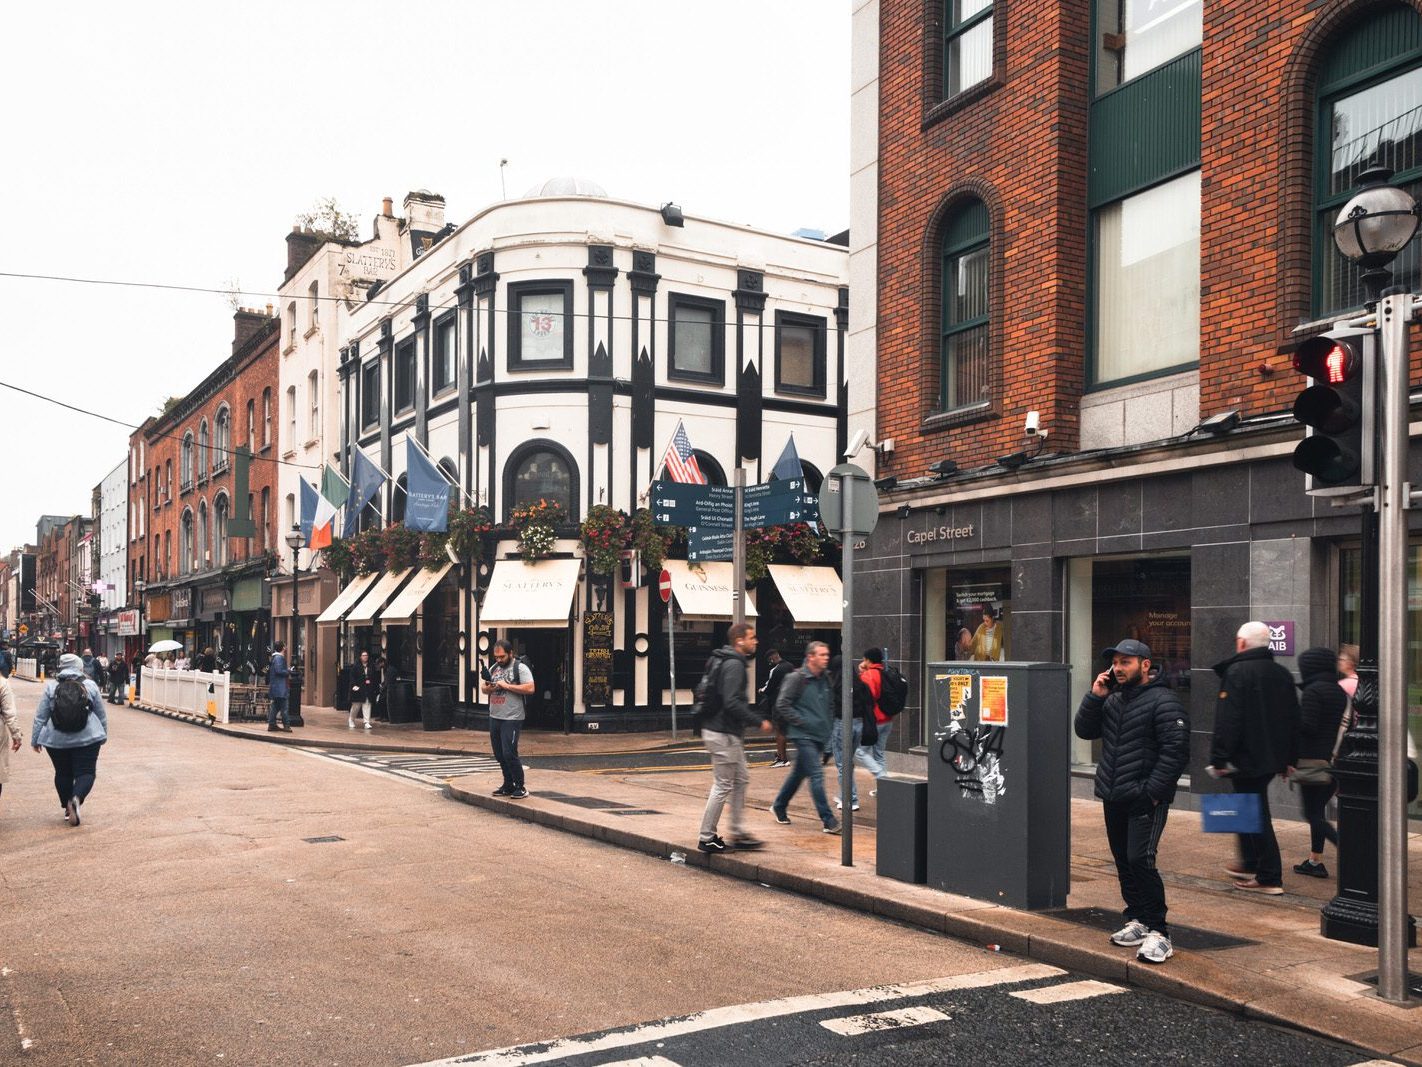 CAPEL STREET ON A DULL WET DAY [INTERIM CAPEL STREET IMPROVEMENT WORKS ARE NOW ONGOING] 017